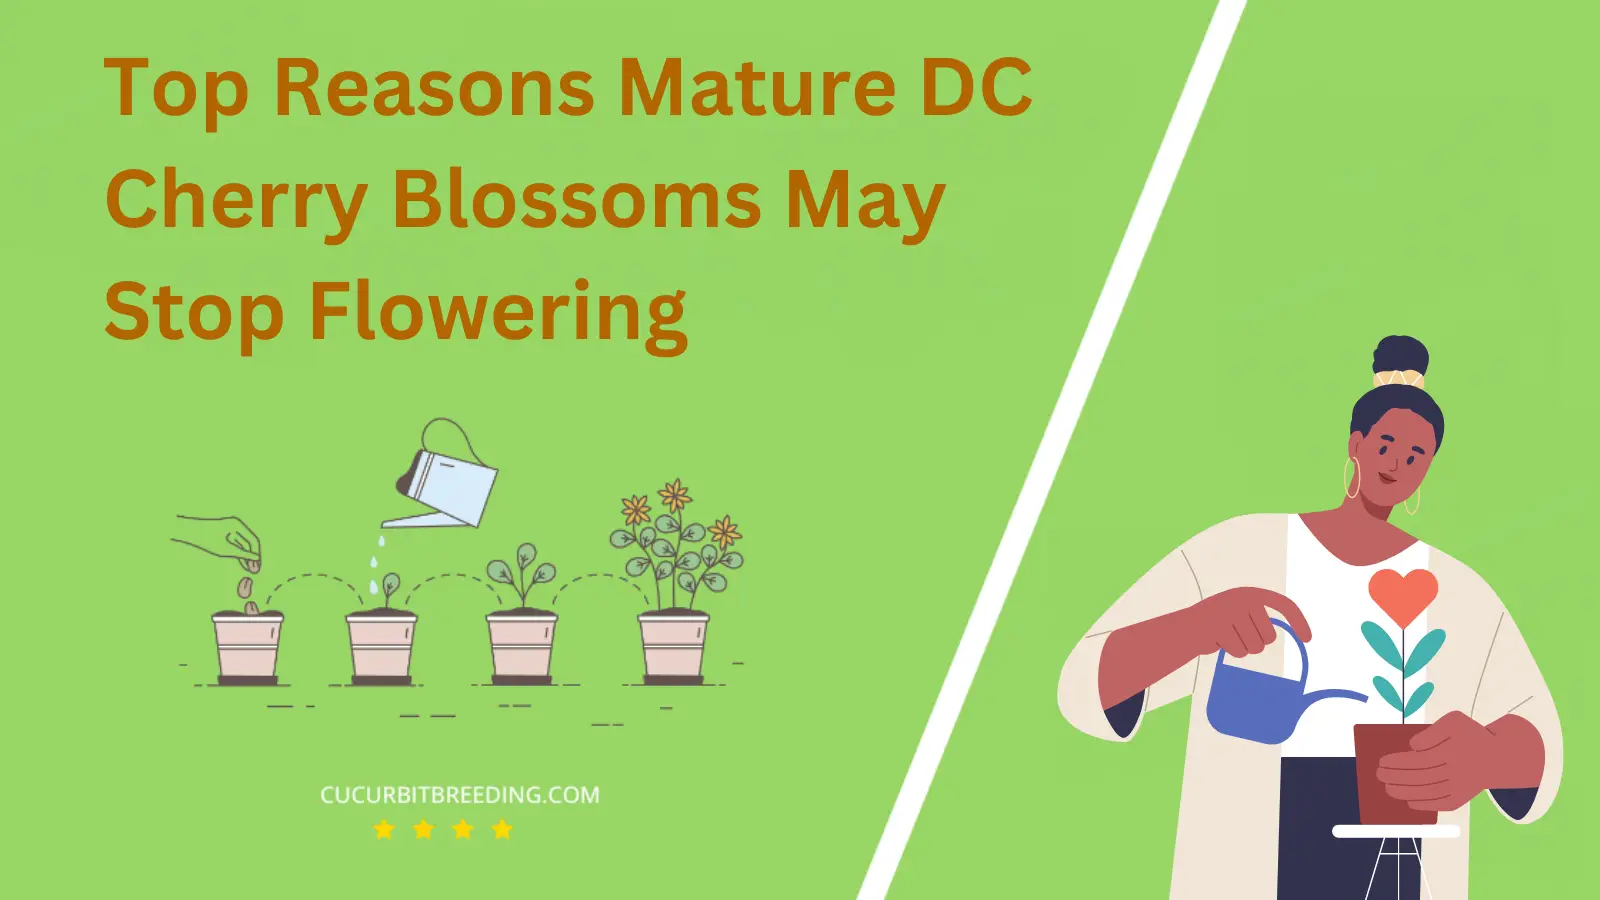 Top Reasons Mature DC Cherry Blossoms May Stop Flowering